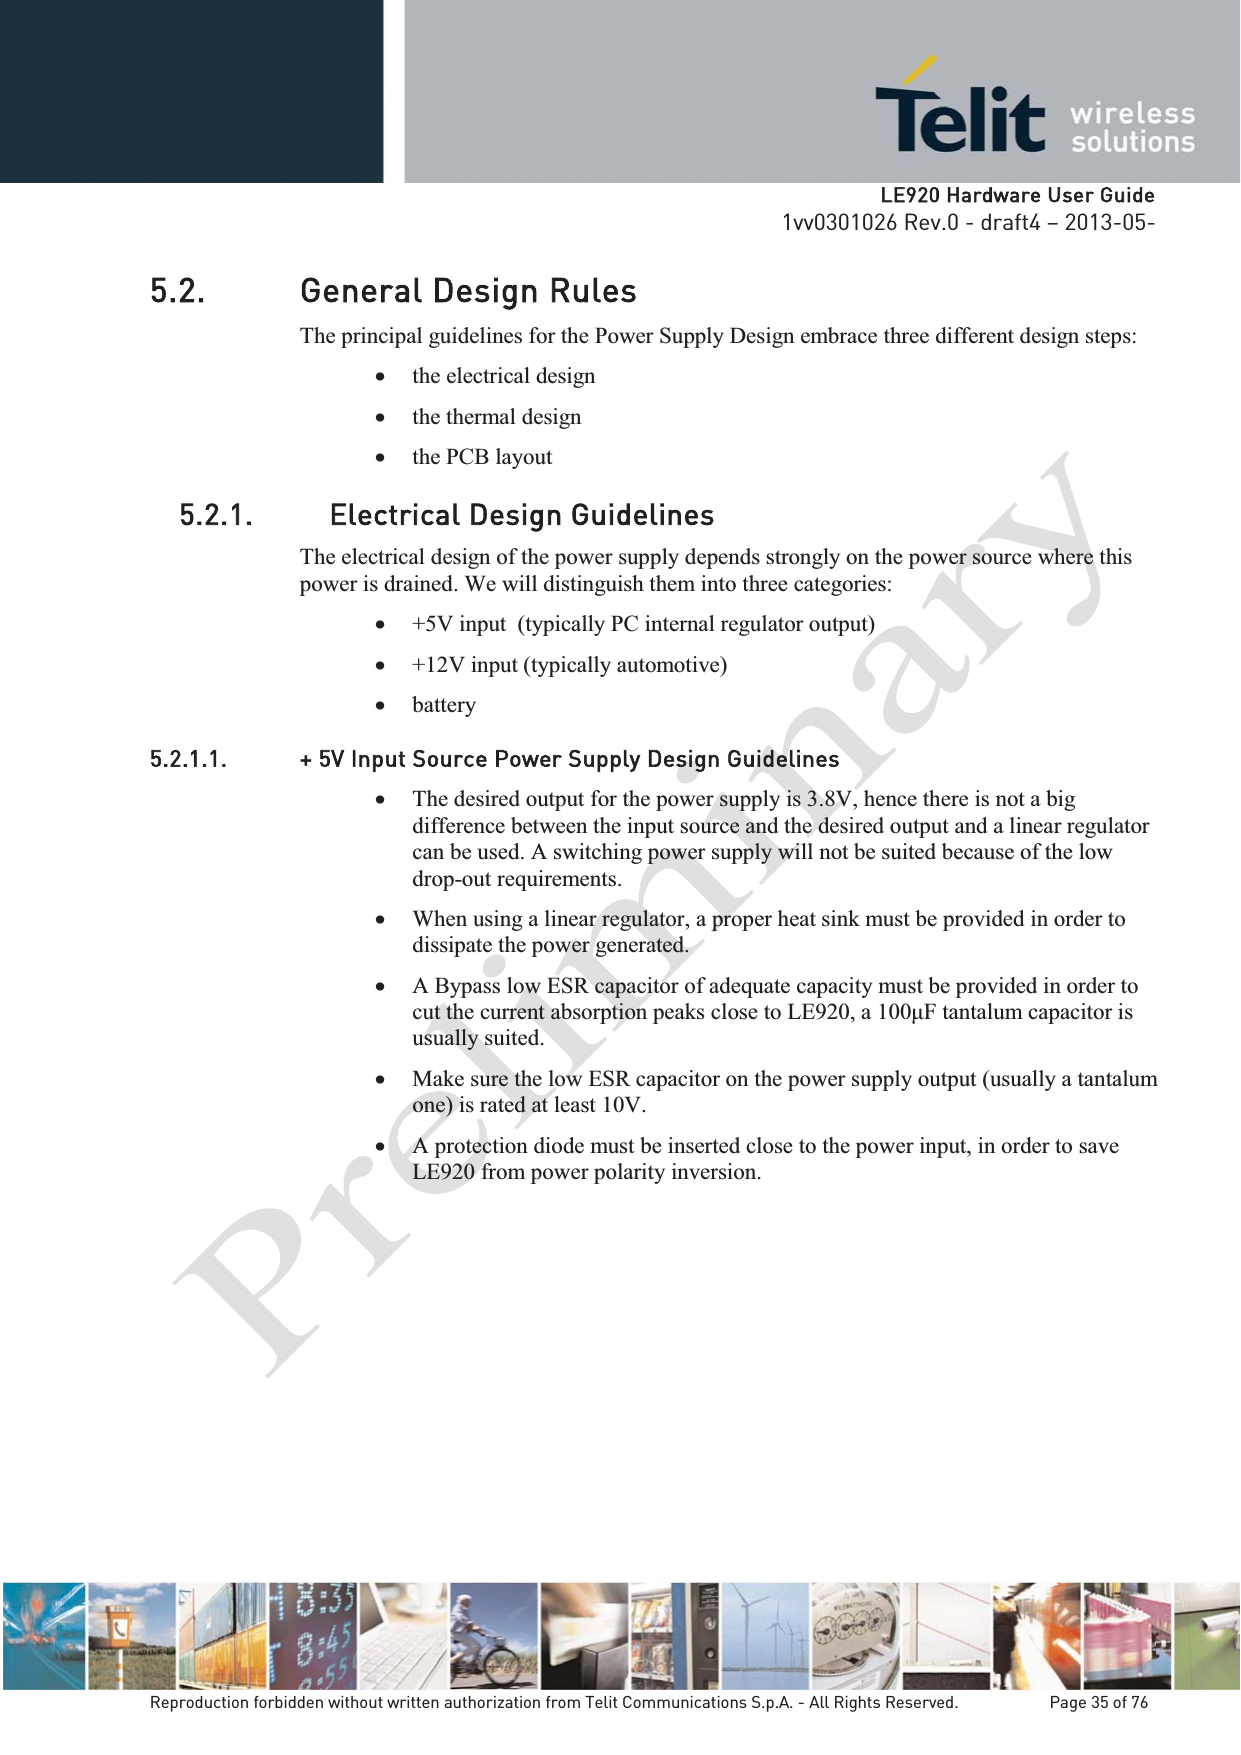   LLE920 Hardware User Guide1vv0301026 Rev.0 - draft4 – 2013-05-Reproduction forbidden without written authorization from Telit Communications S.p.A. - All Rights Reserved.    Page 35 of 76 5.2. General Design Rules The principal guidelines for the Power Supply Design embrace three different design steps: x the electrical design x the thermal design x the PCB layout 5.2.1. Electrical Design Guidelines The electrical design of the power supply depends strongly on the power source where this power is drained. We will distinguish them into three categories: x +5V input  (typically PC internal regulator output) x +12V input (typically automotive) x battery 5.2.1.1. + 5V Input Source Power Supply Design Guidelines x The desired output for the power supply is 3.8V, hence there is not a big difference between the input source and the desired output and a linear regulator can be used. A switching power supply will not be suited because of the low drop-out requirements. x When using a linear regulator, a proper heat sink must be provided in order to dissipate the power generated. x A Bypass low ESR capacitor of adequate capacity must be provided in order to cut the current absorption peaks close to LE920usually suited. x Make sure the low ESR capacitor on the power supply output (usually a tantalum one) is rated at least 10V. x A protection diode must be inserted close to the power input, in order to save LE920 from power polarity inversion.       